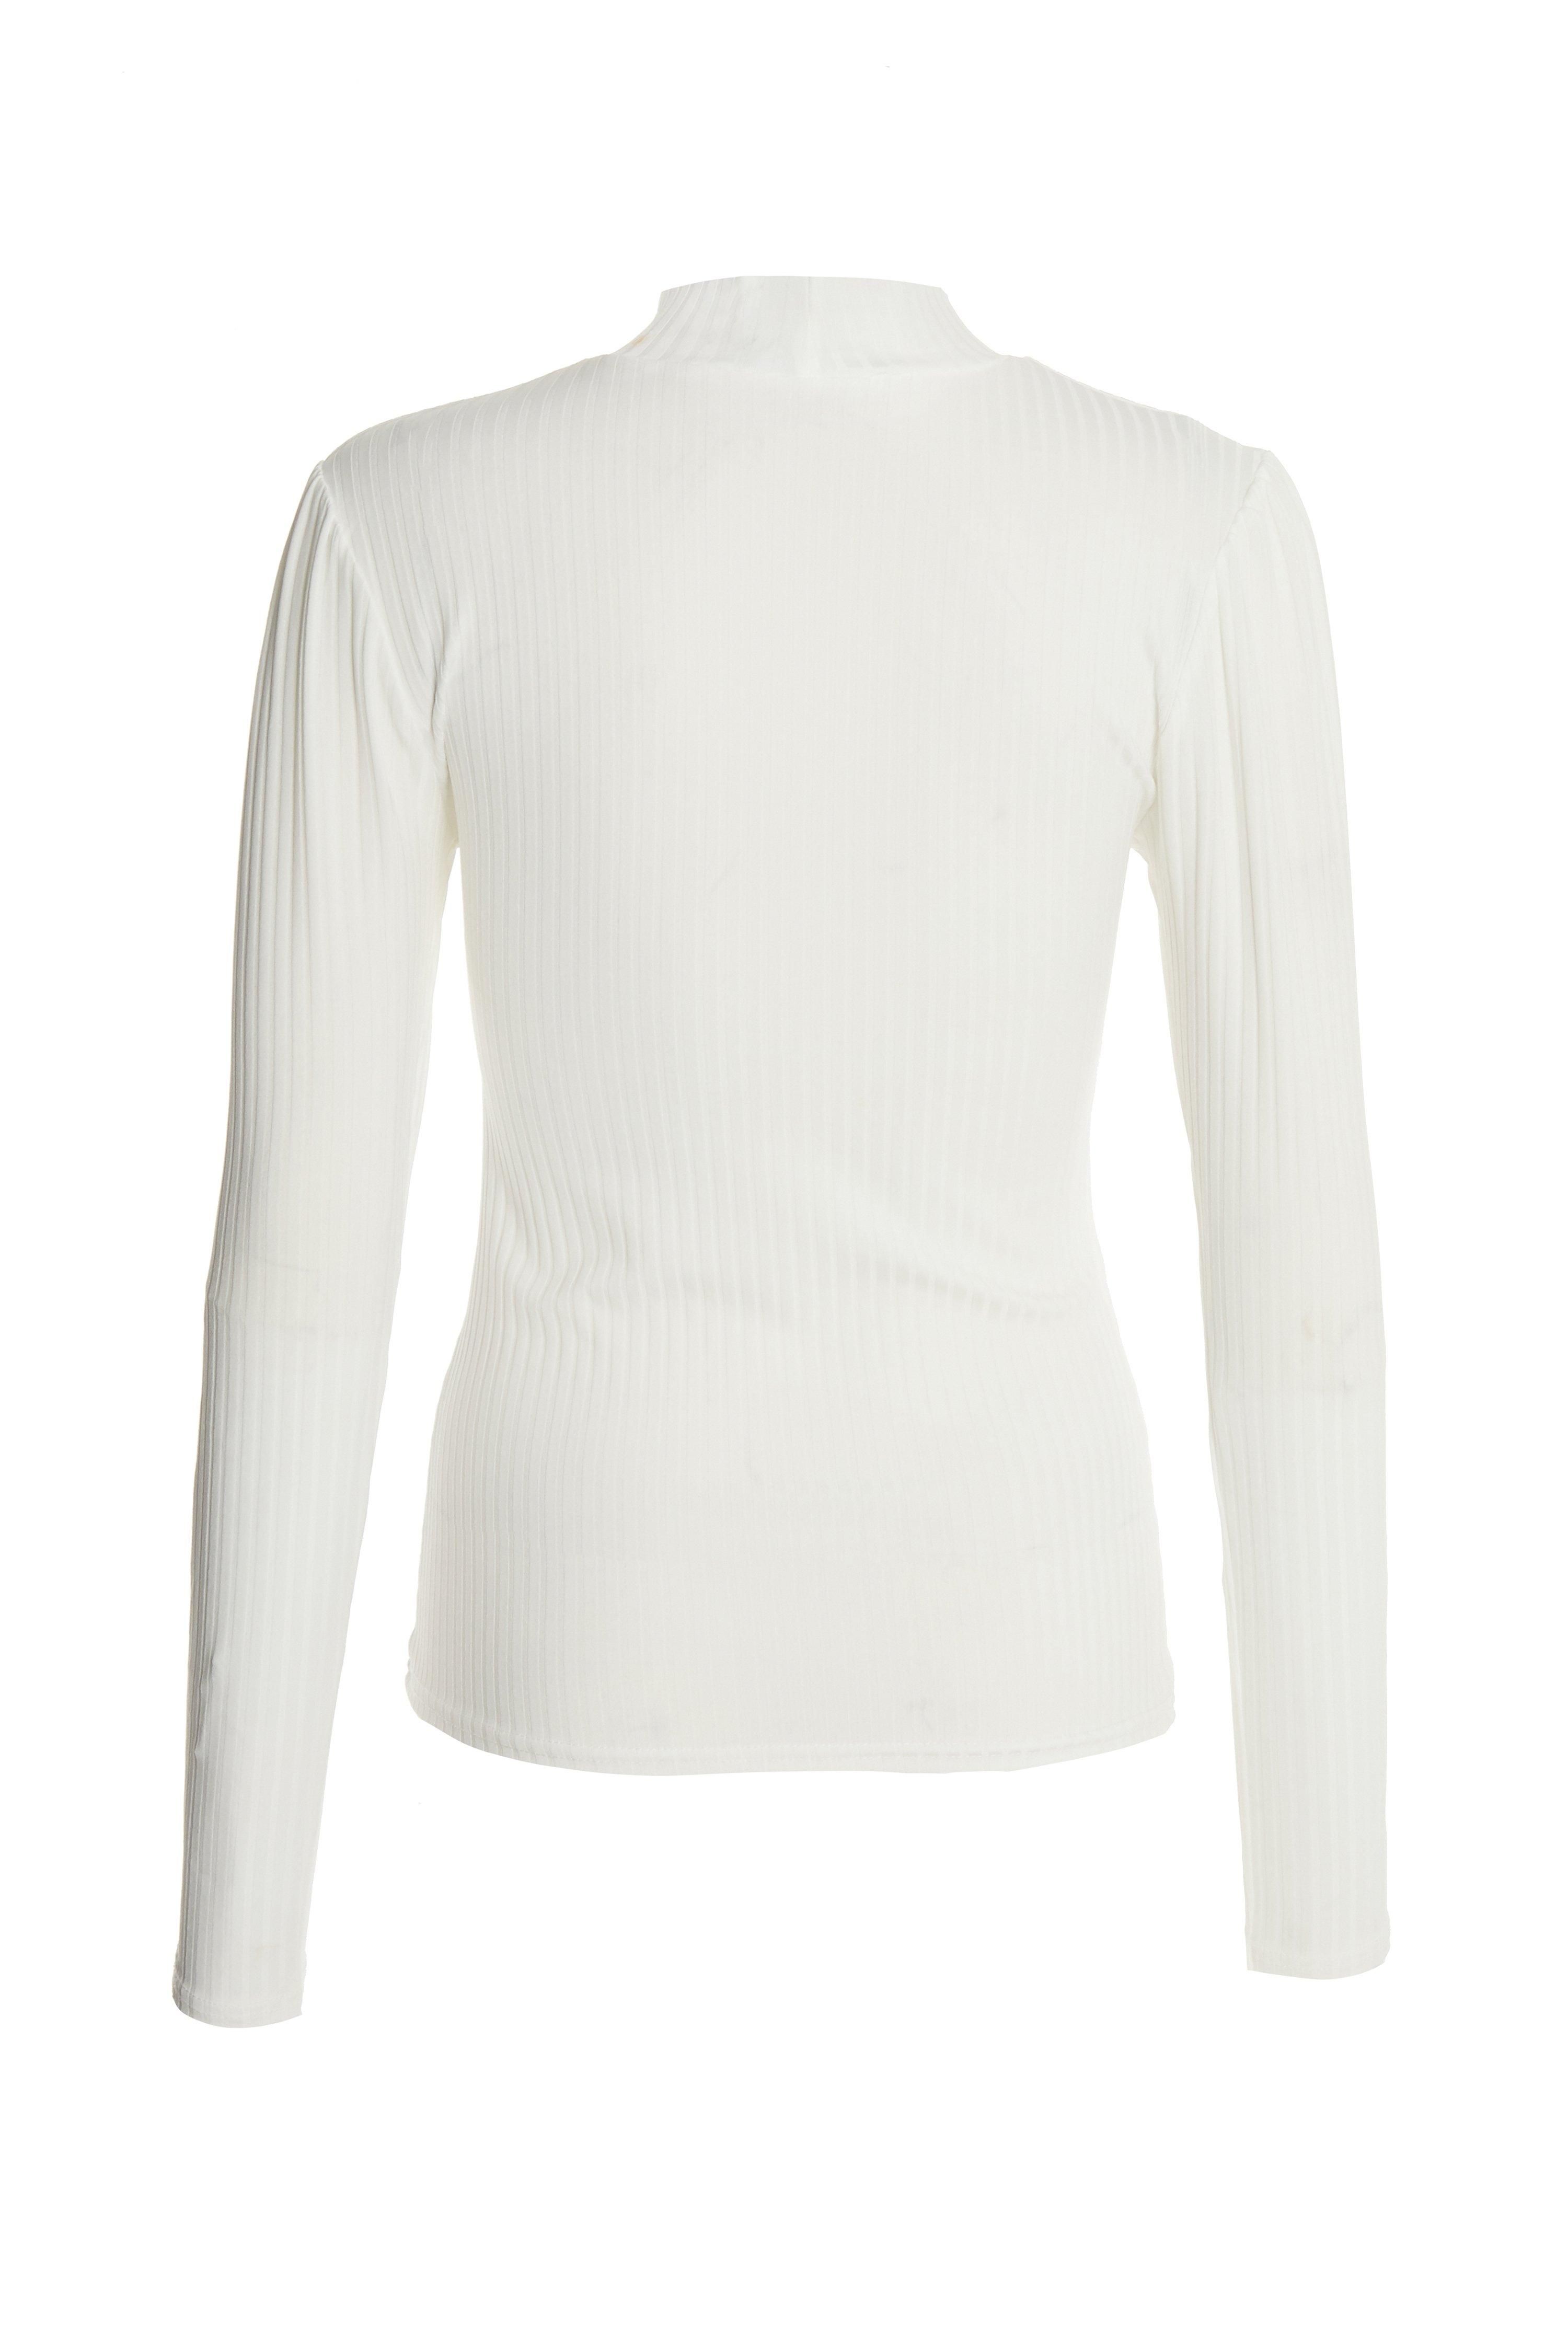 - Turtle neck  - Ribbed texture  - Long sleeve  - Length: 60cm approx  - Model Height: 5' 8